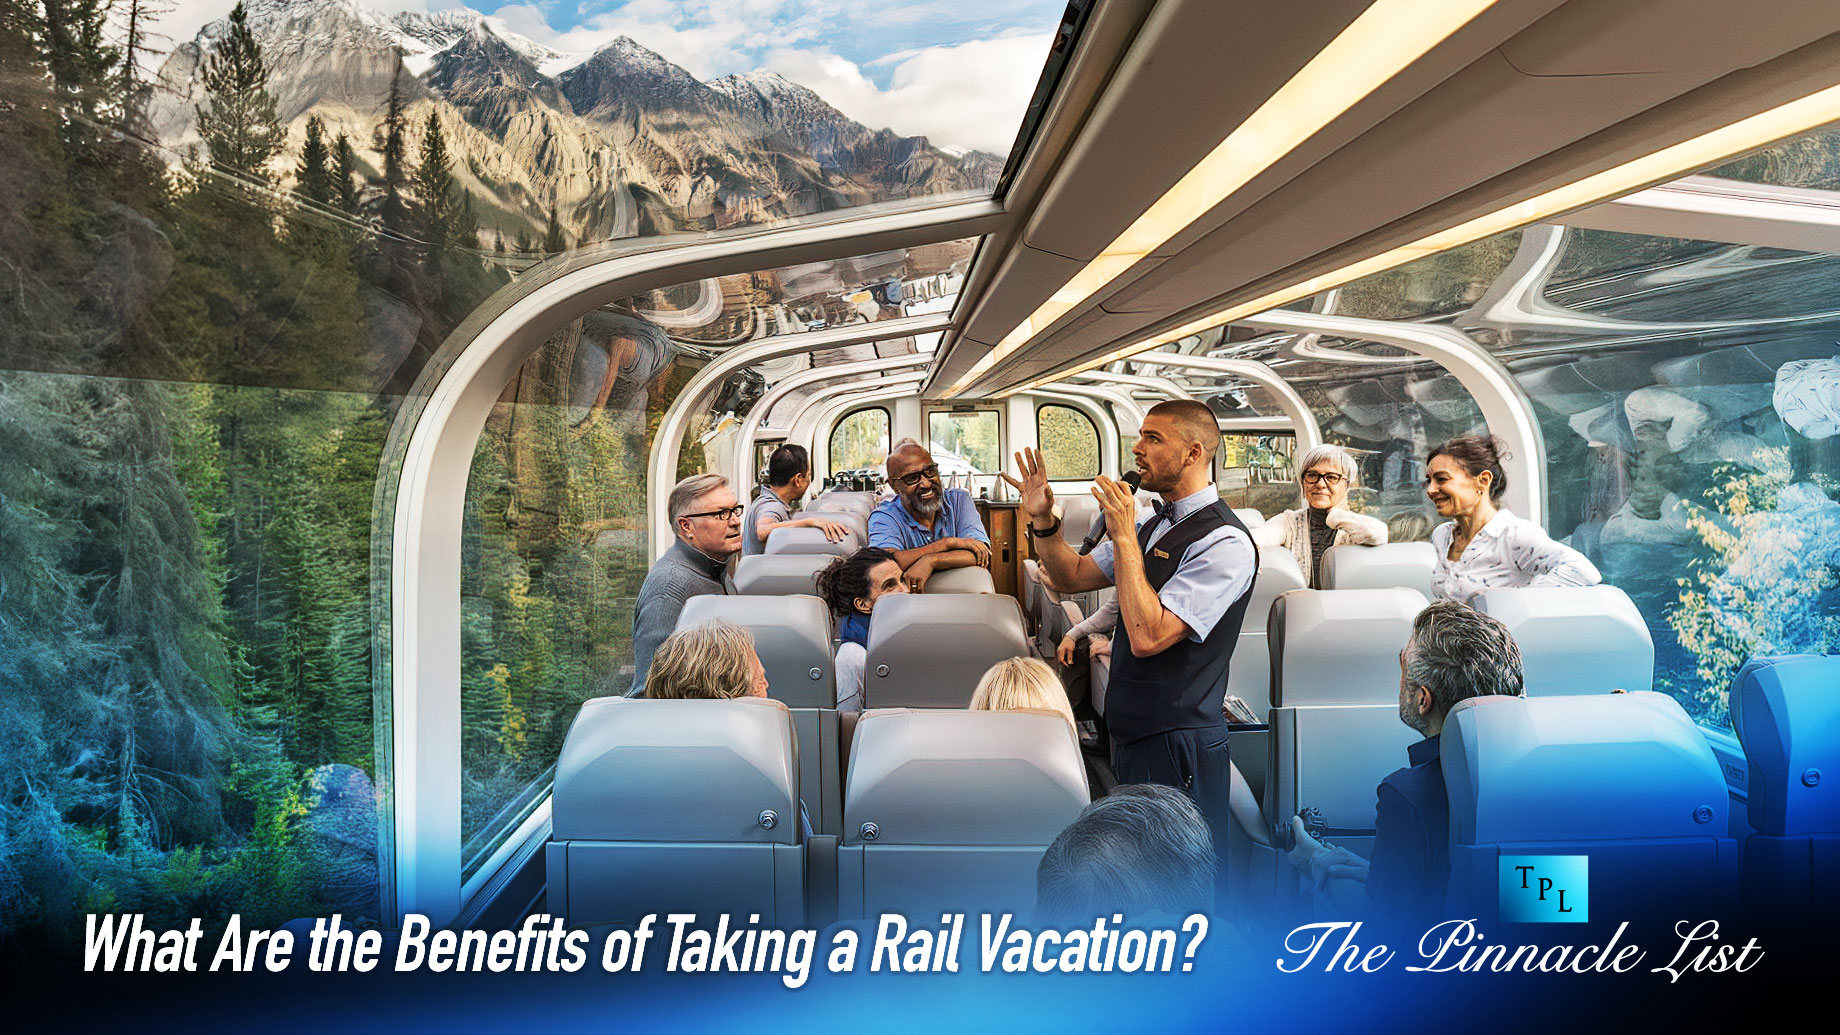 What Are the Benefits of Taking a Rail Vacation?